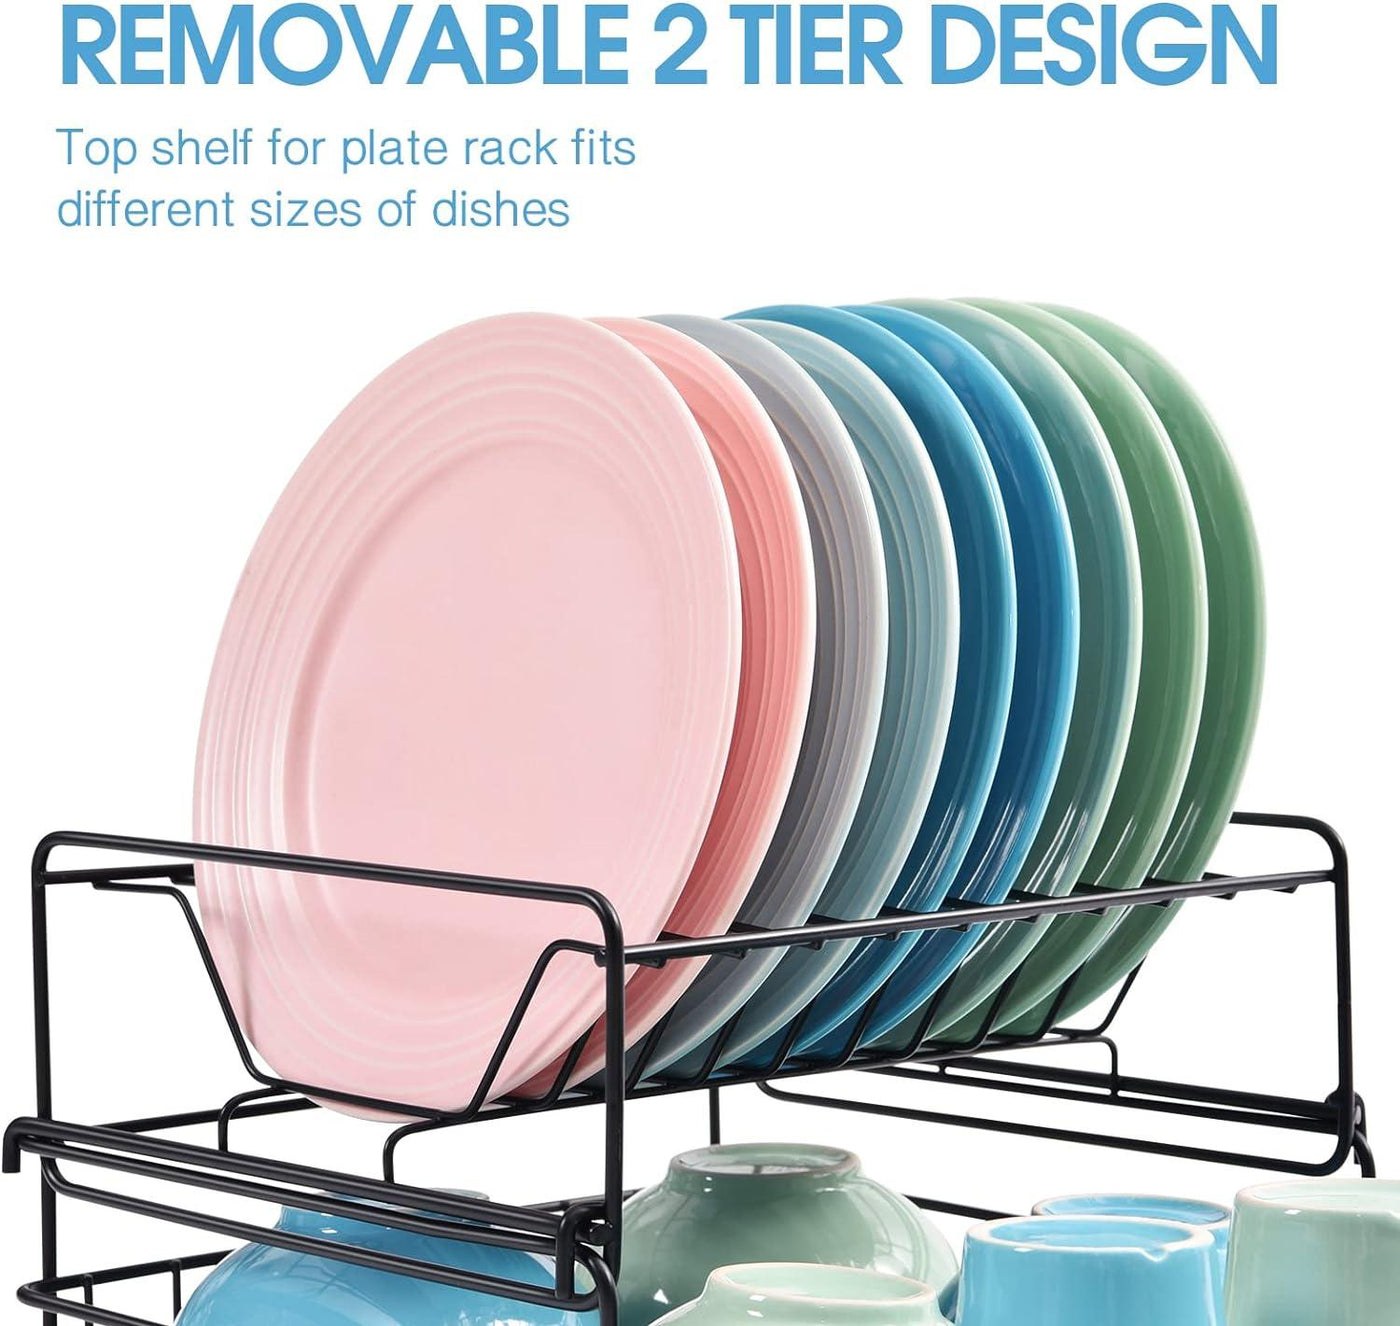 KINGRACK 2 Tier Dish Drainer Rack with Removable Cutlery Holder & Drip Tray - Massive Discounts